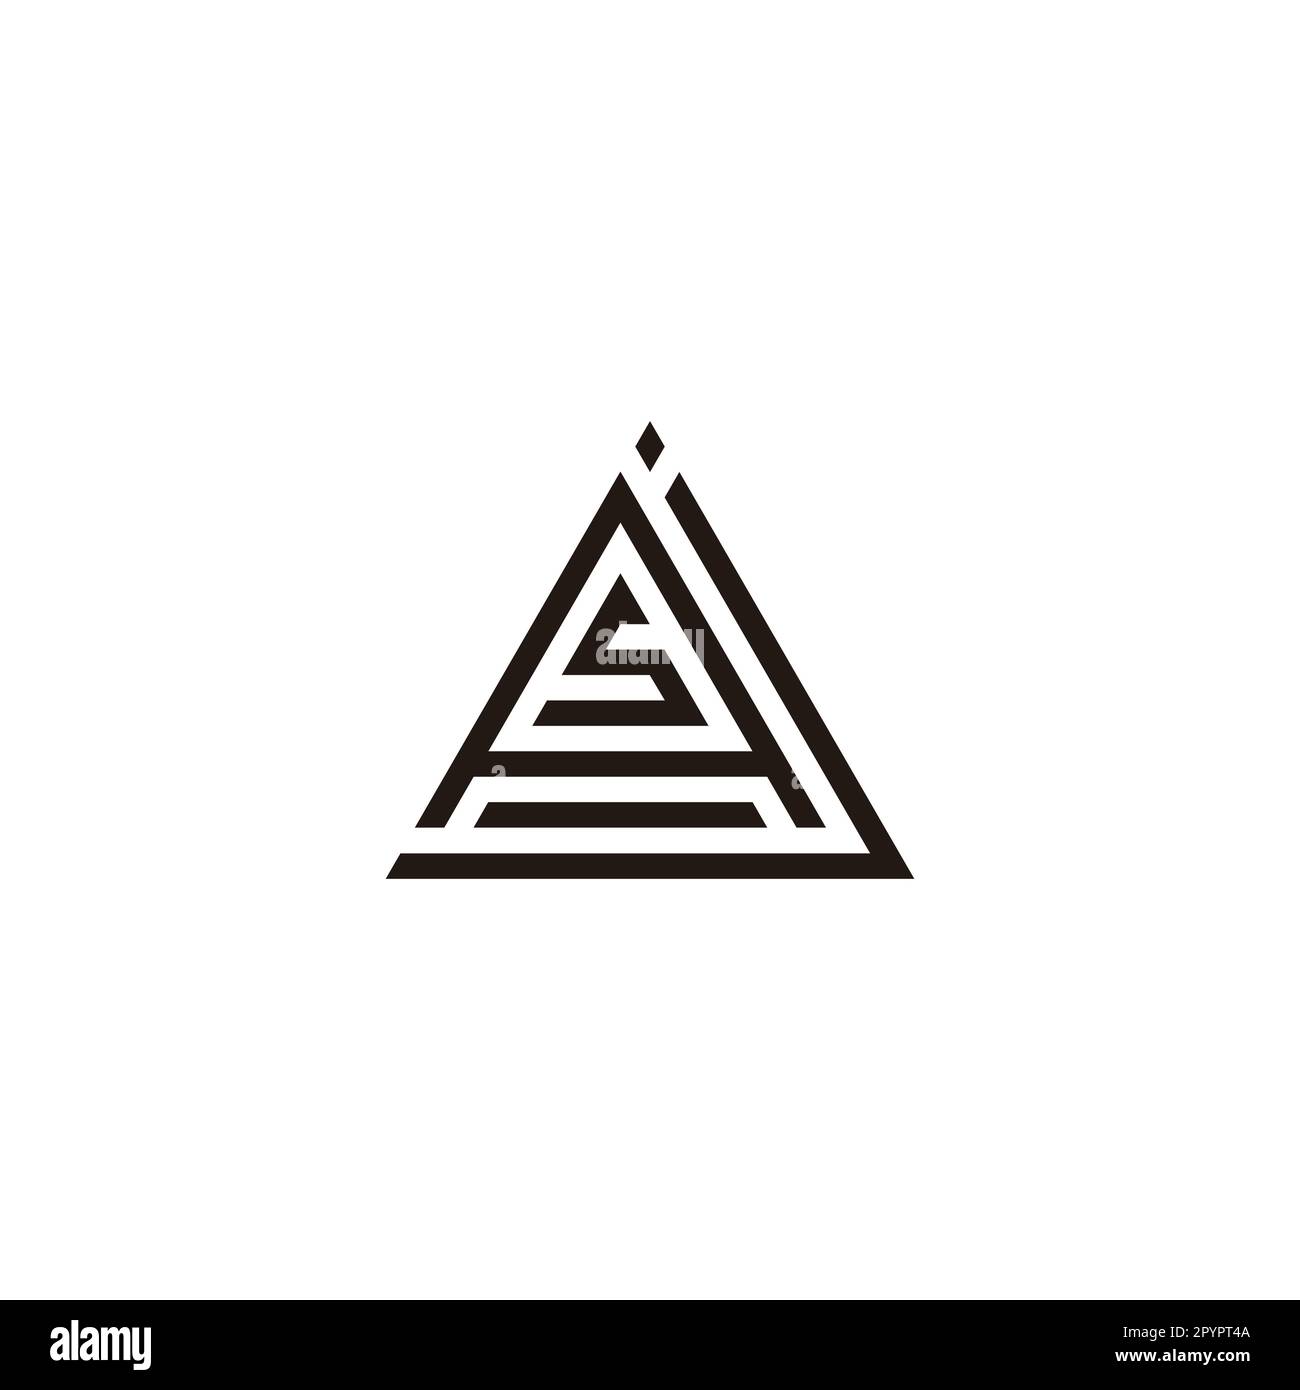 Letter j, A and s triangle geometric symbol simple logo vector Stock Vector